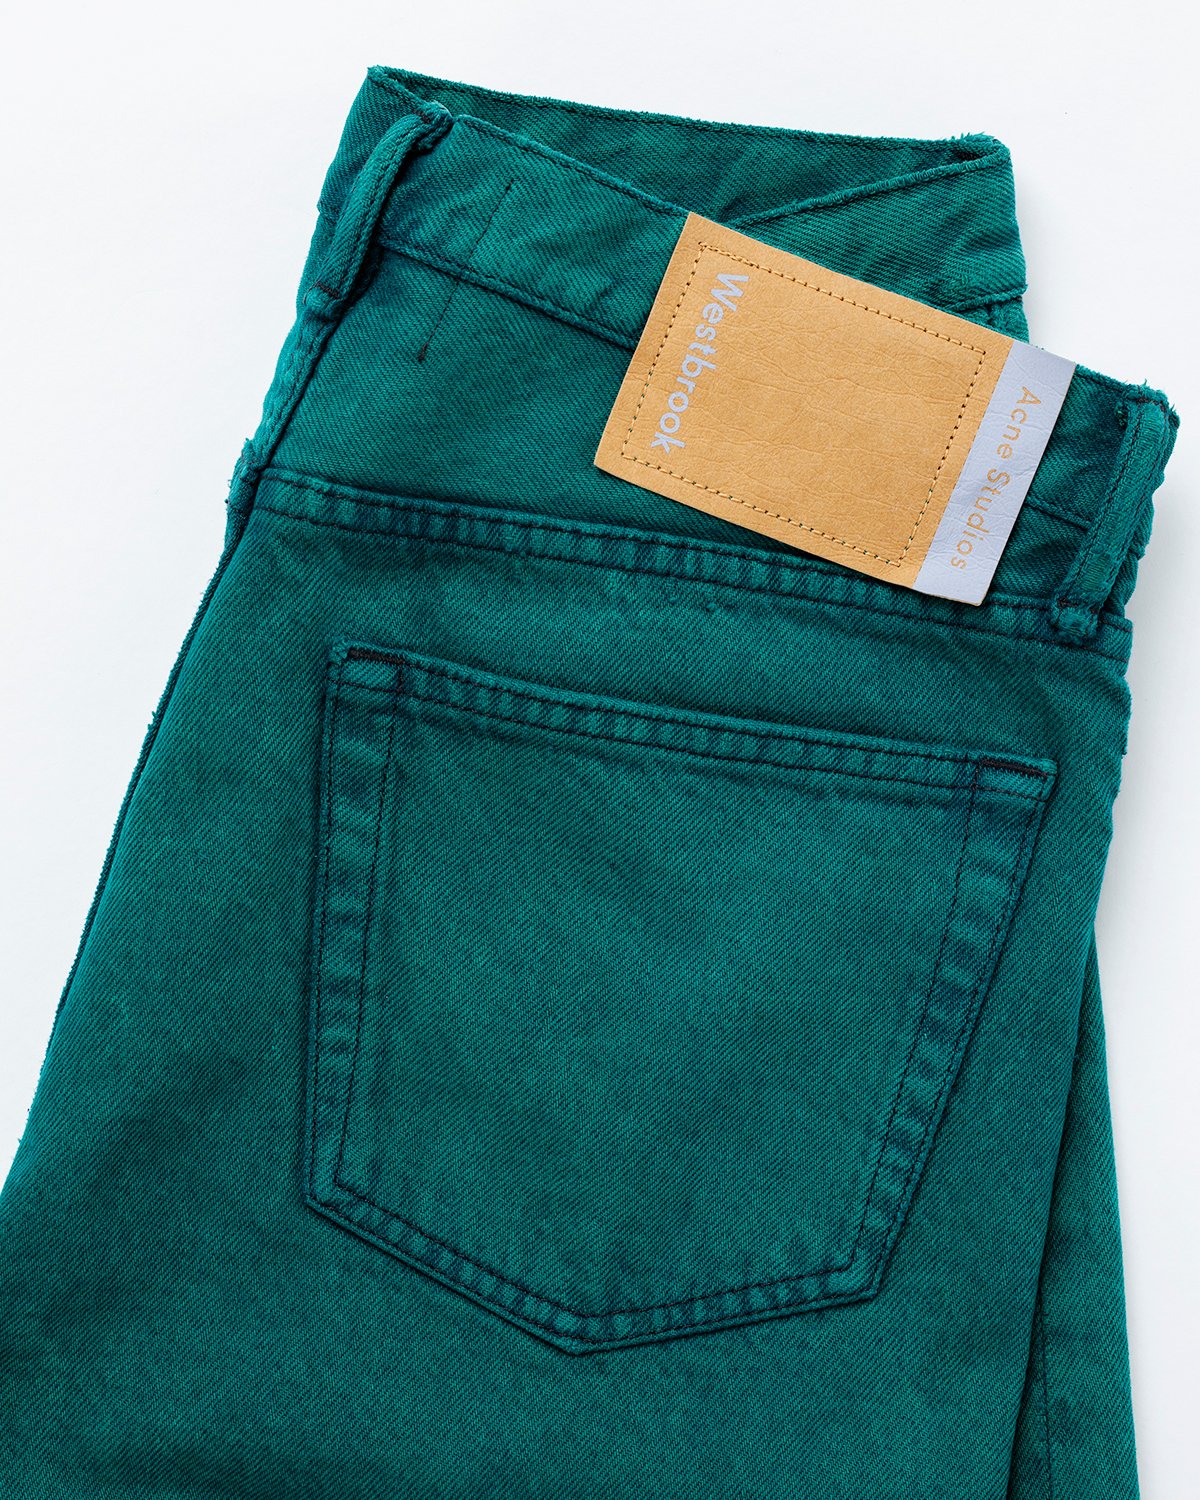 Acne Studios - Overdyed Jeans Jade Green - Clothing - Green - Image 4